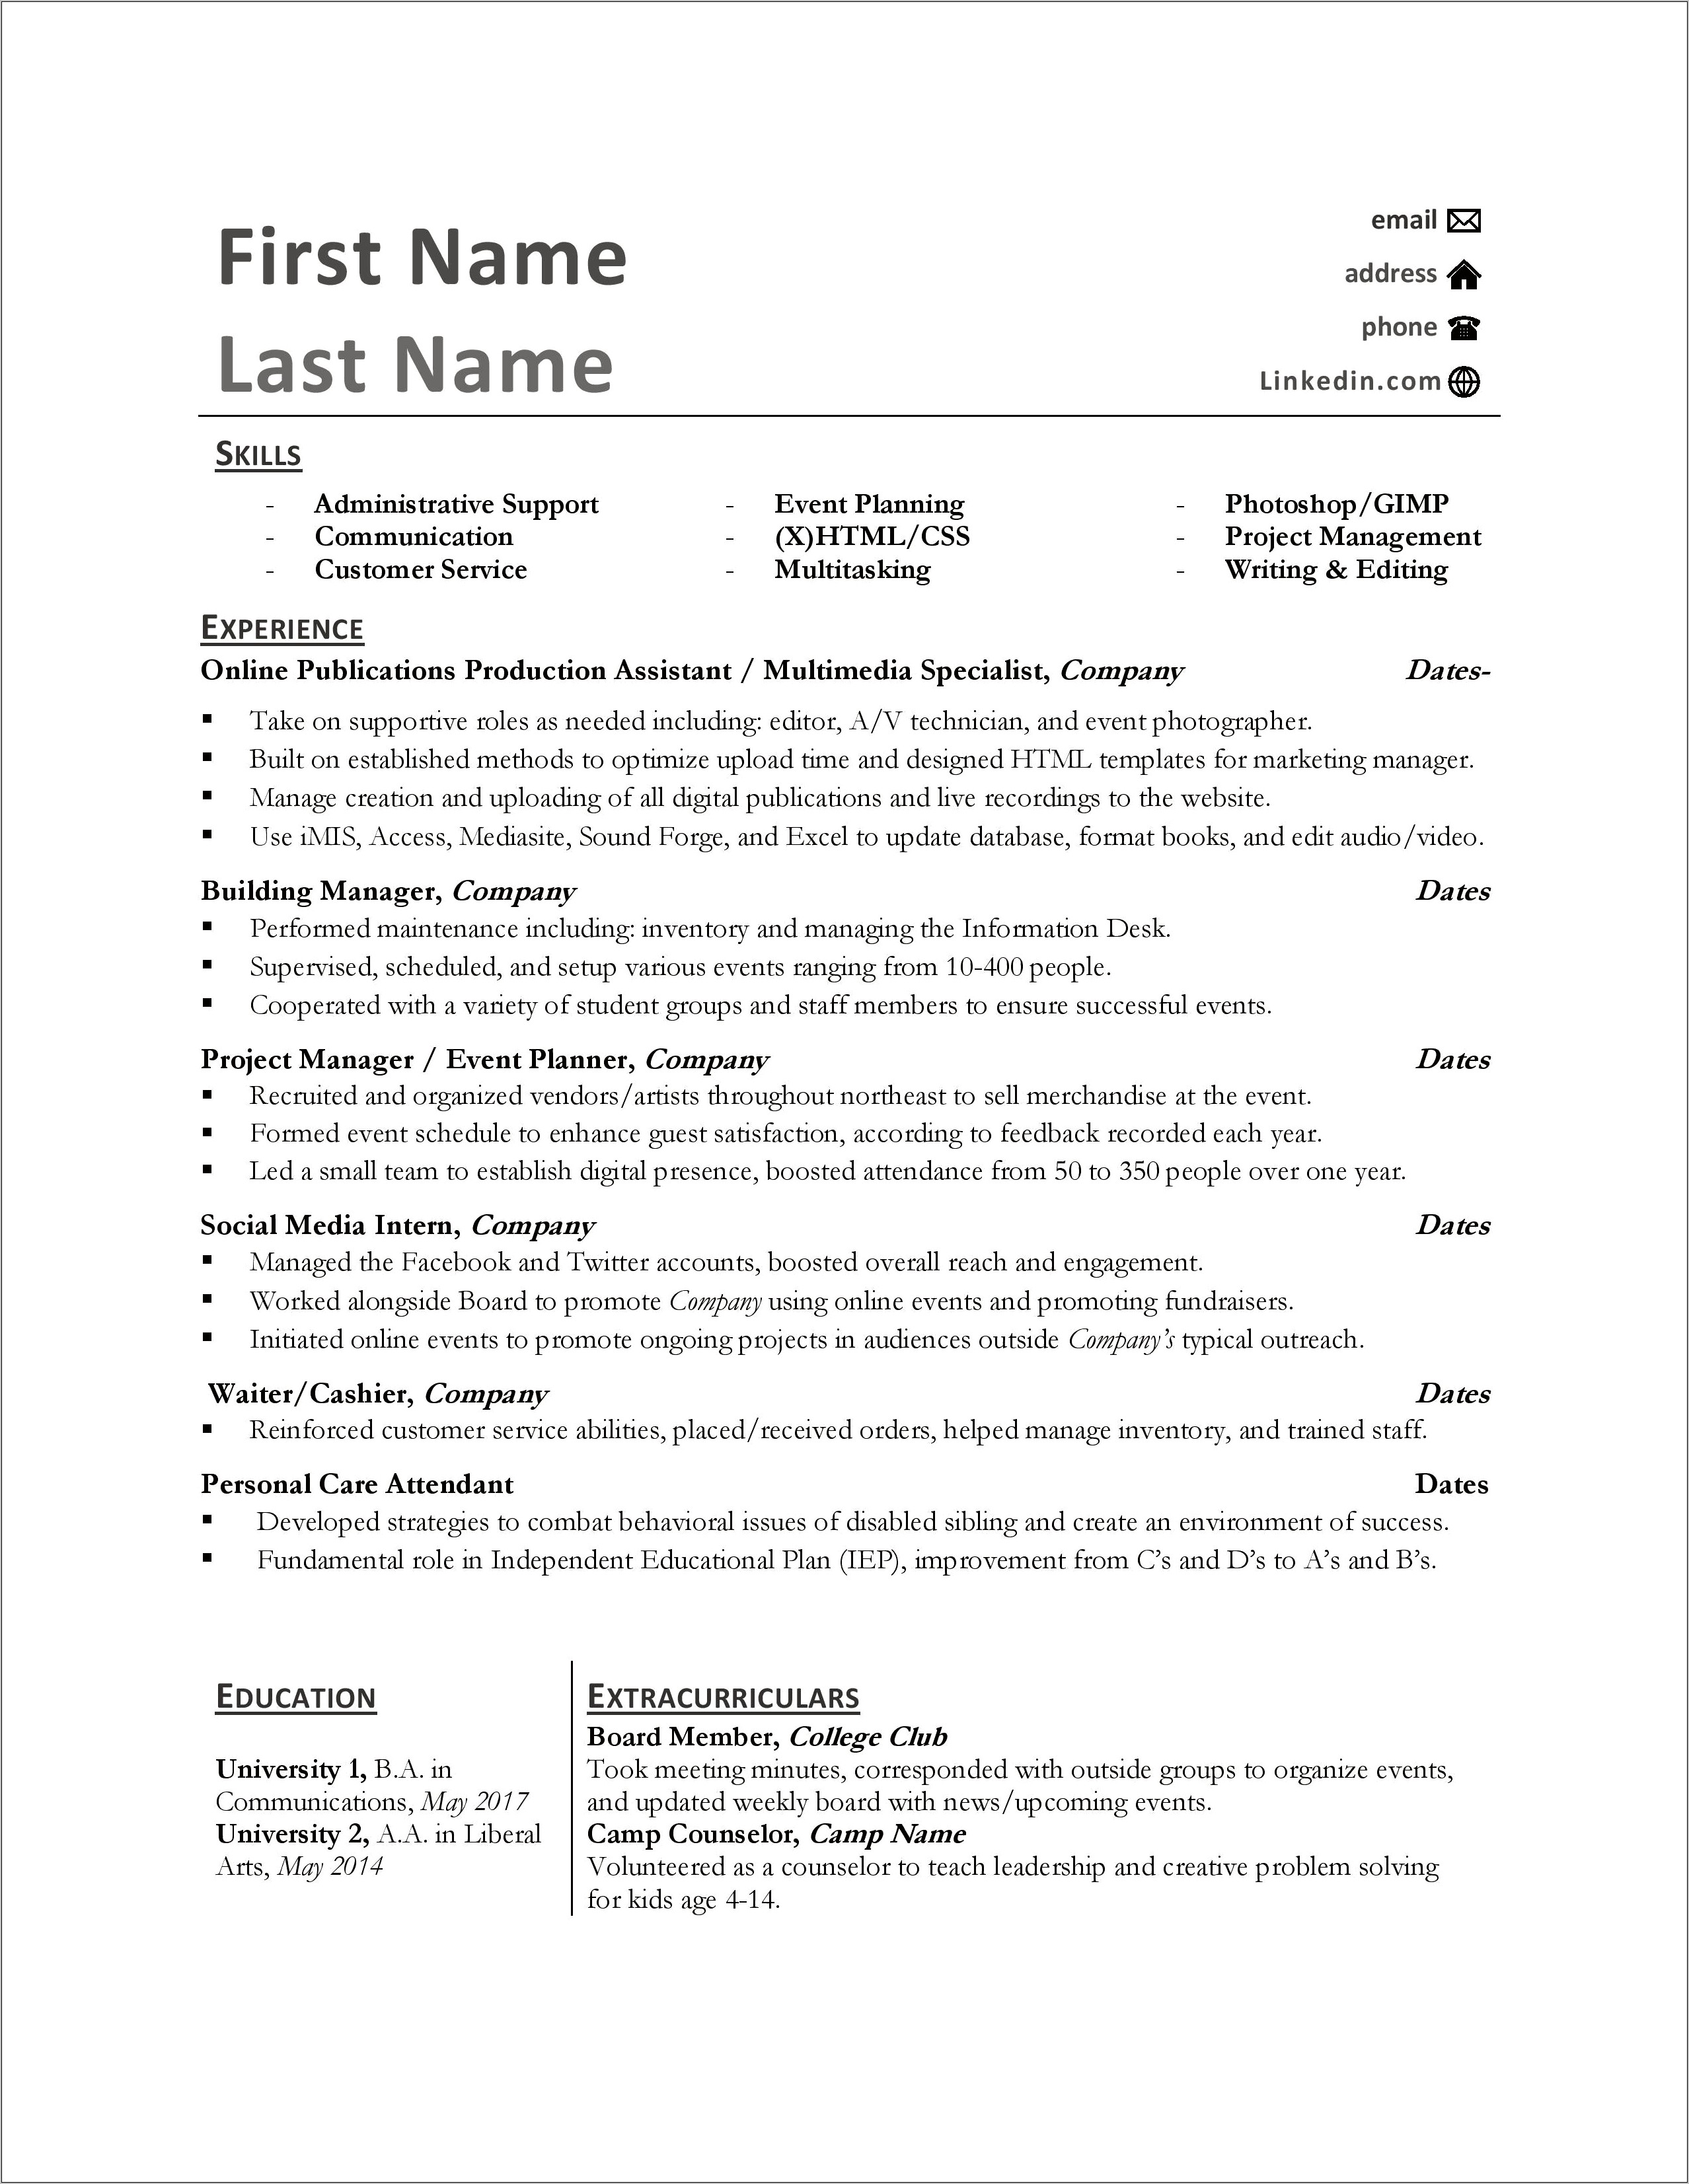 Job Positions At Same Loctaion Resume